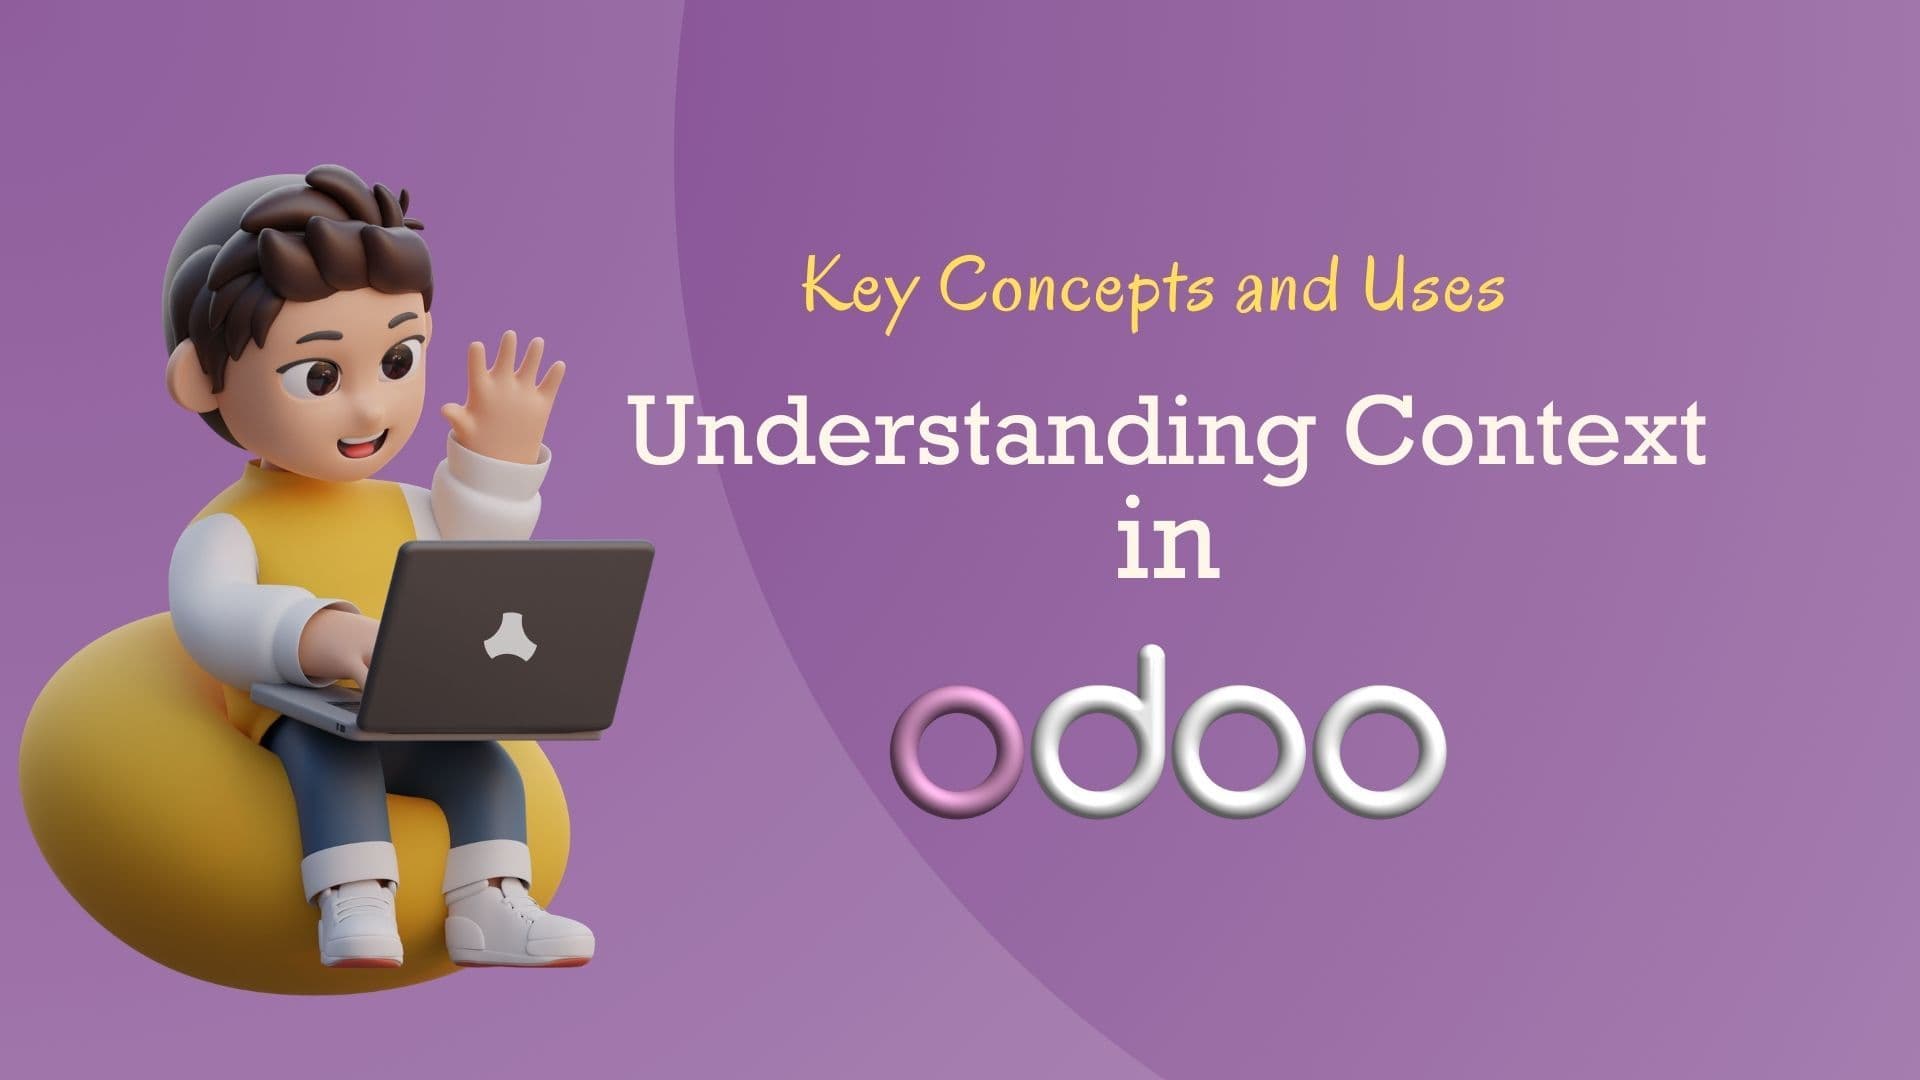 Understanding Context in Odoo: Key Concepts and Uses